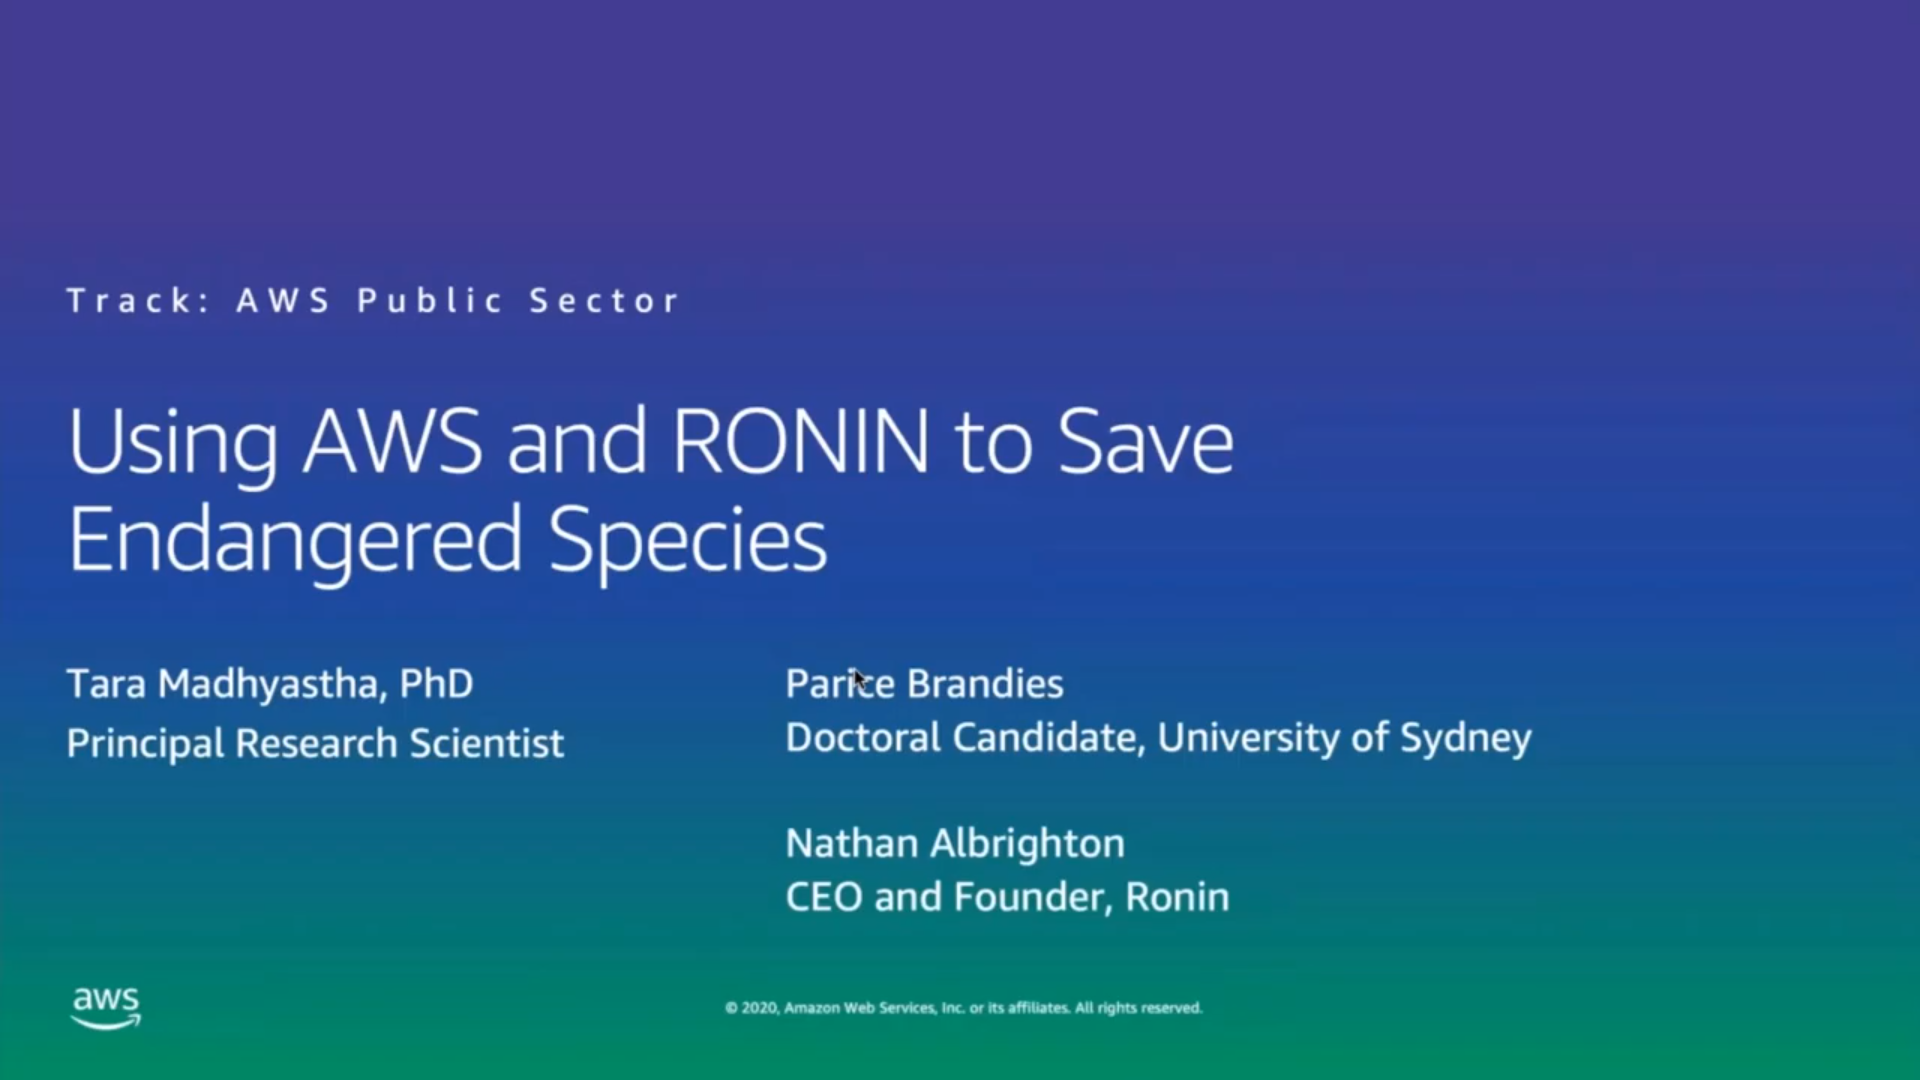 Using AWS and RONIN to Save Endangered Species